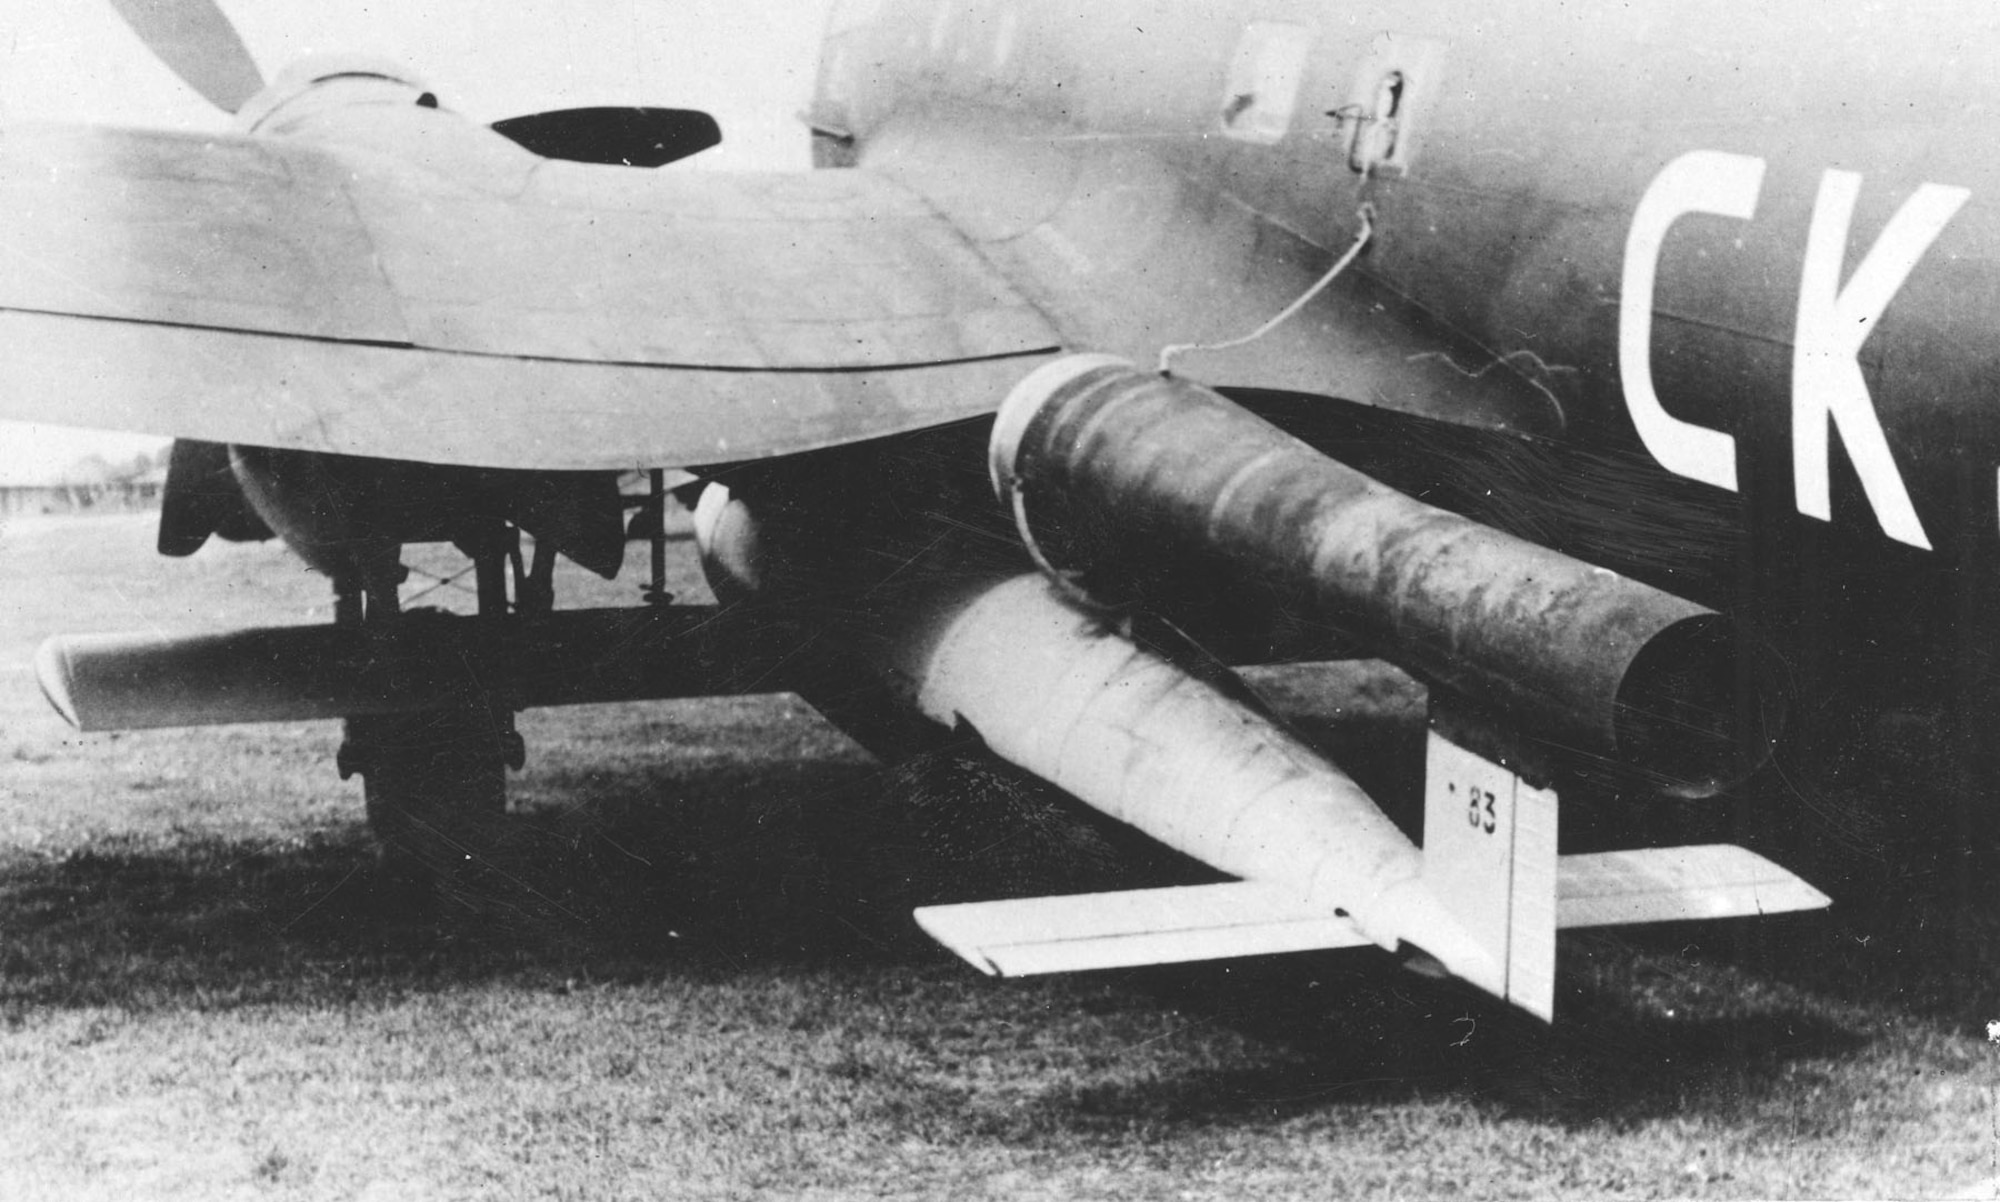 A V-1 mounted on an He 111 bomber for air-launching. This program was unsuccessful. (U.S. Air Force photo)`